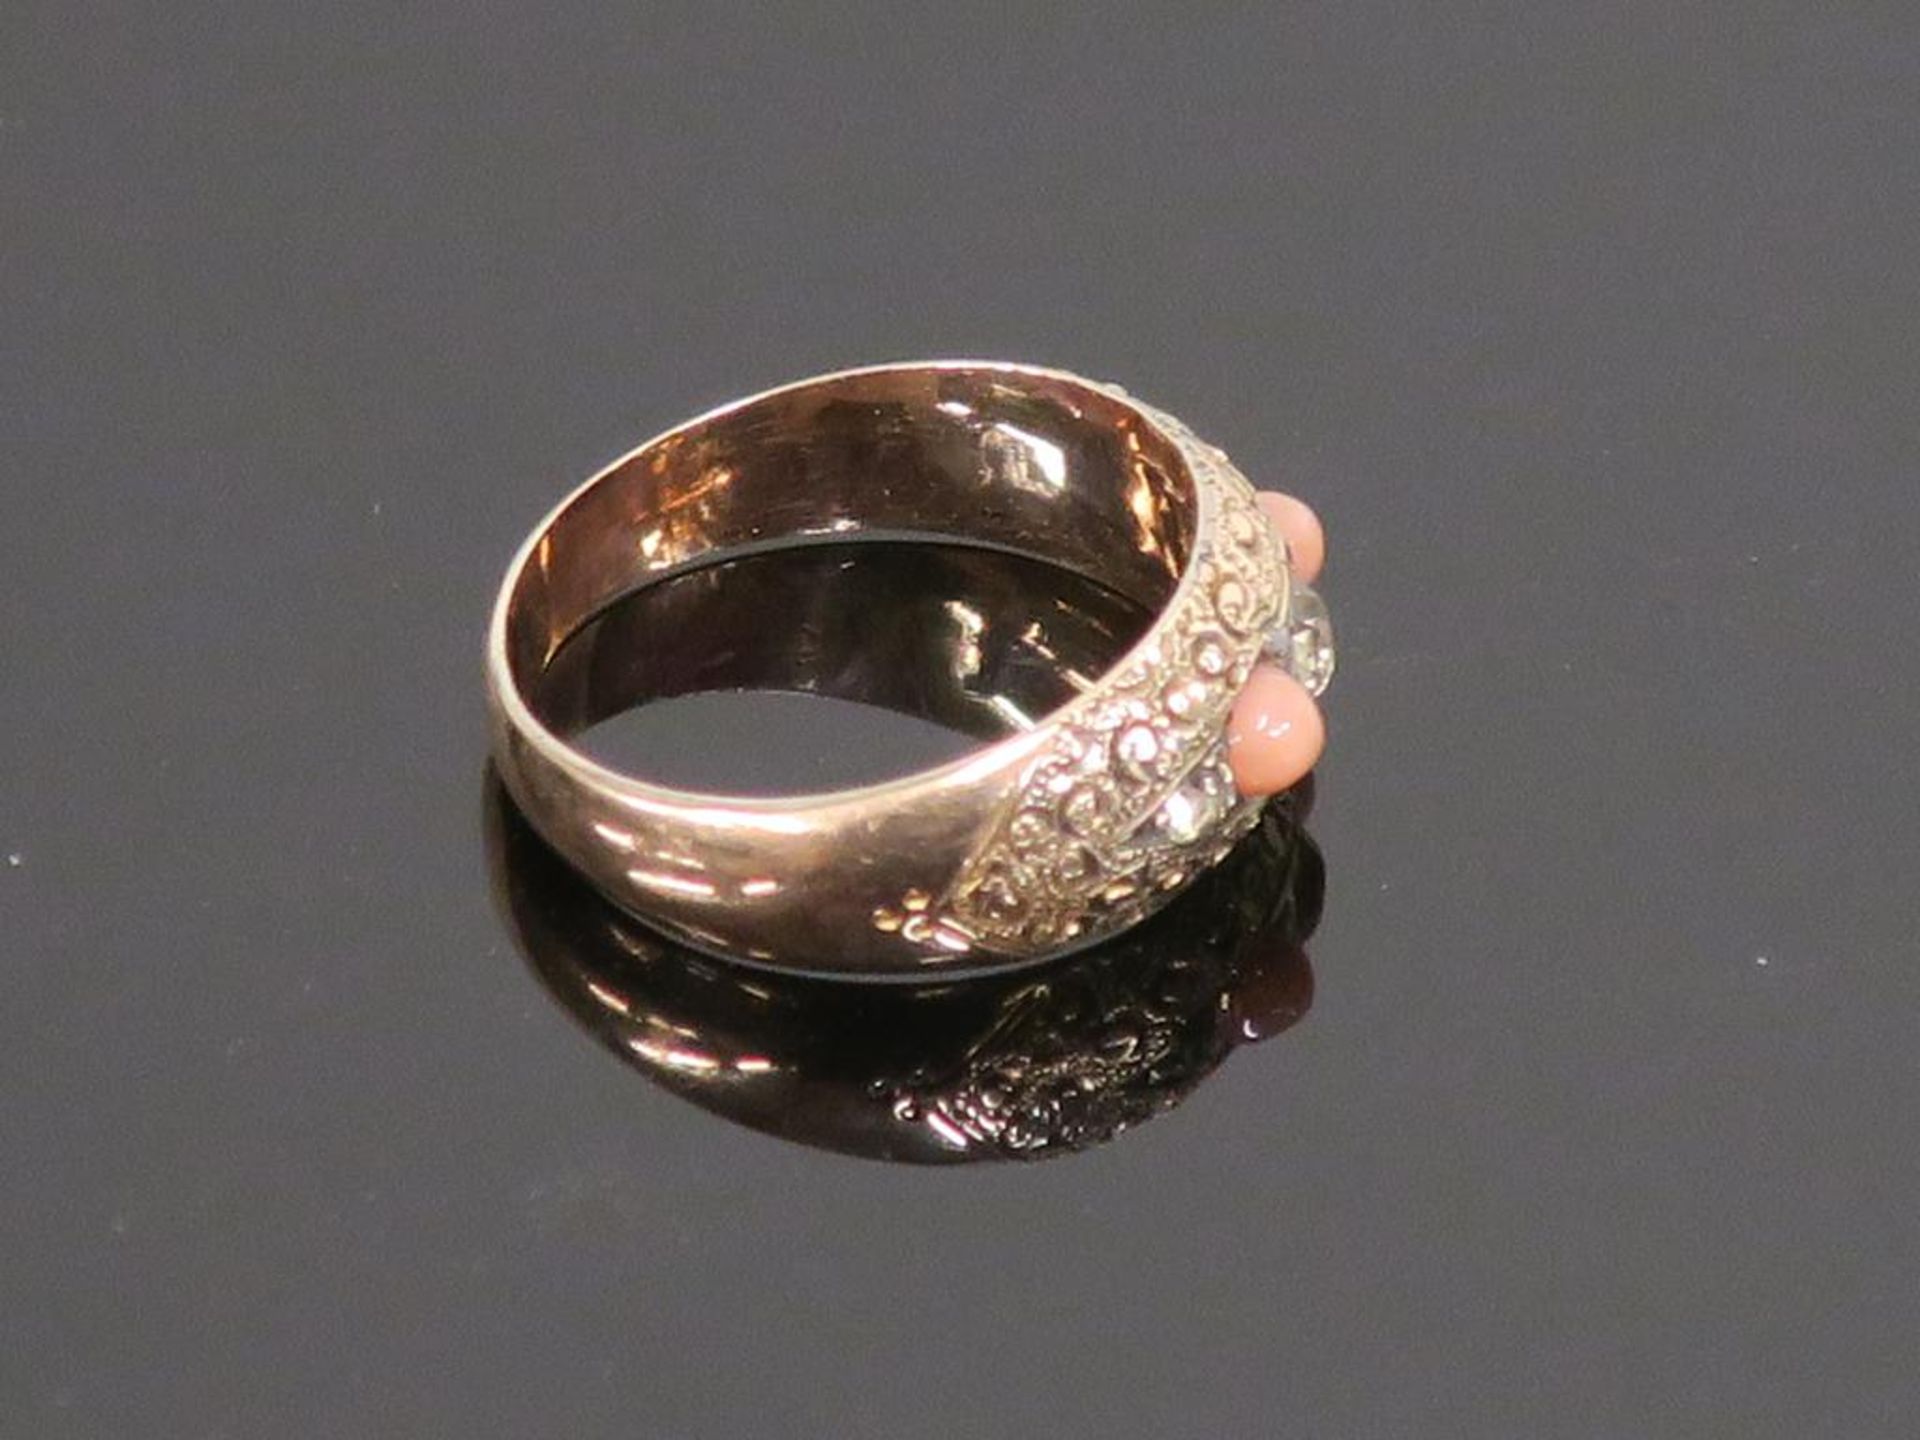 An Antique Coral and Paste 9ct Gold (Birmingham 1899) Ring (size 'M') (est £50-£100) - Image 2 of 3